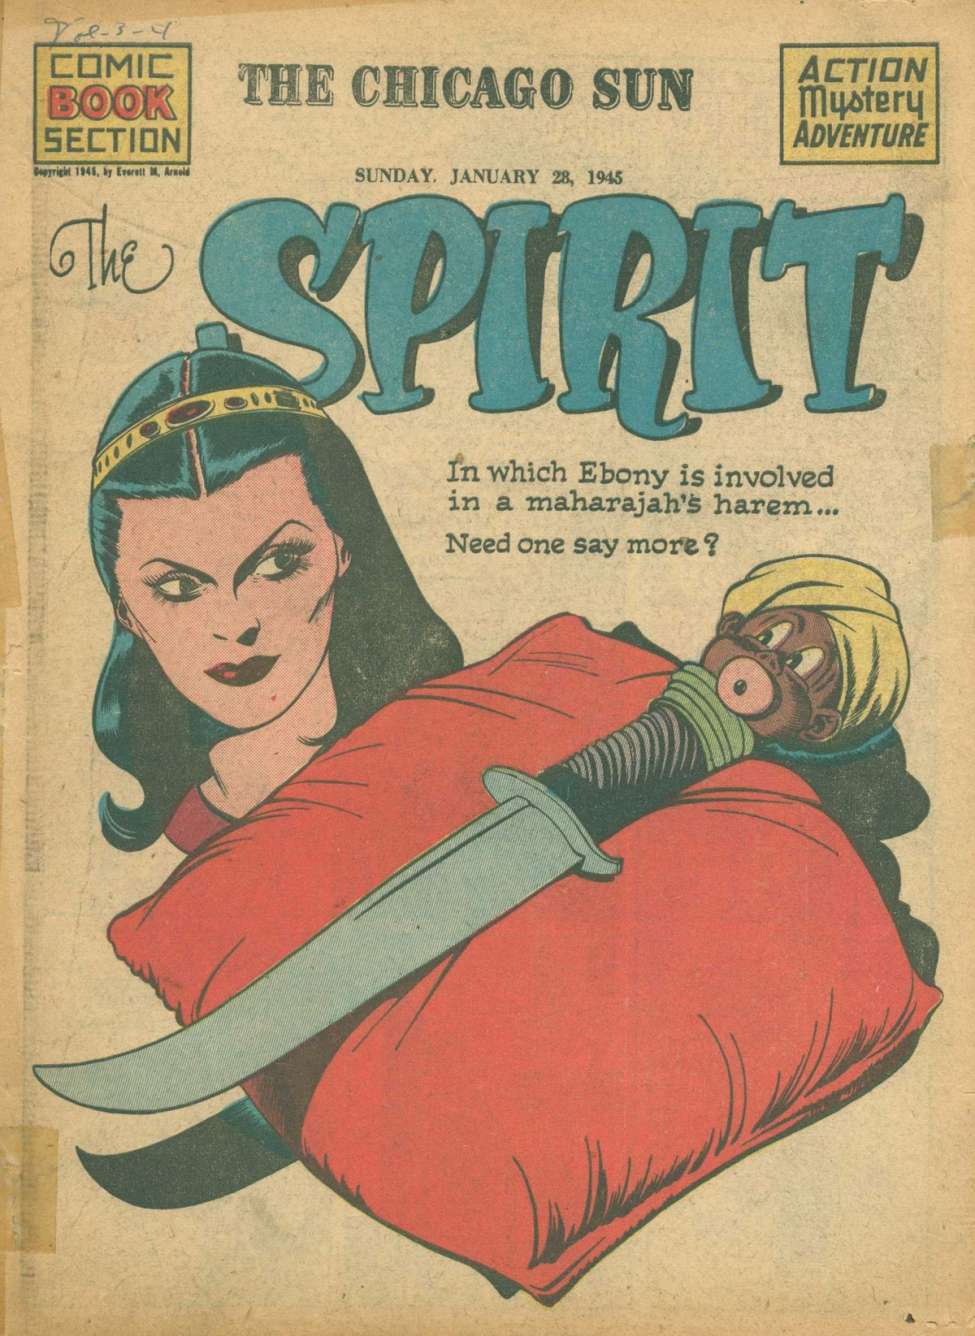 Comic Book Cover For The Spirit (1945-01-28) - Chicago Sun - Version 1